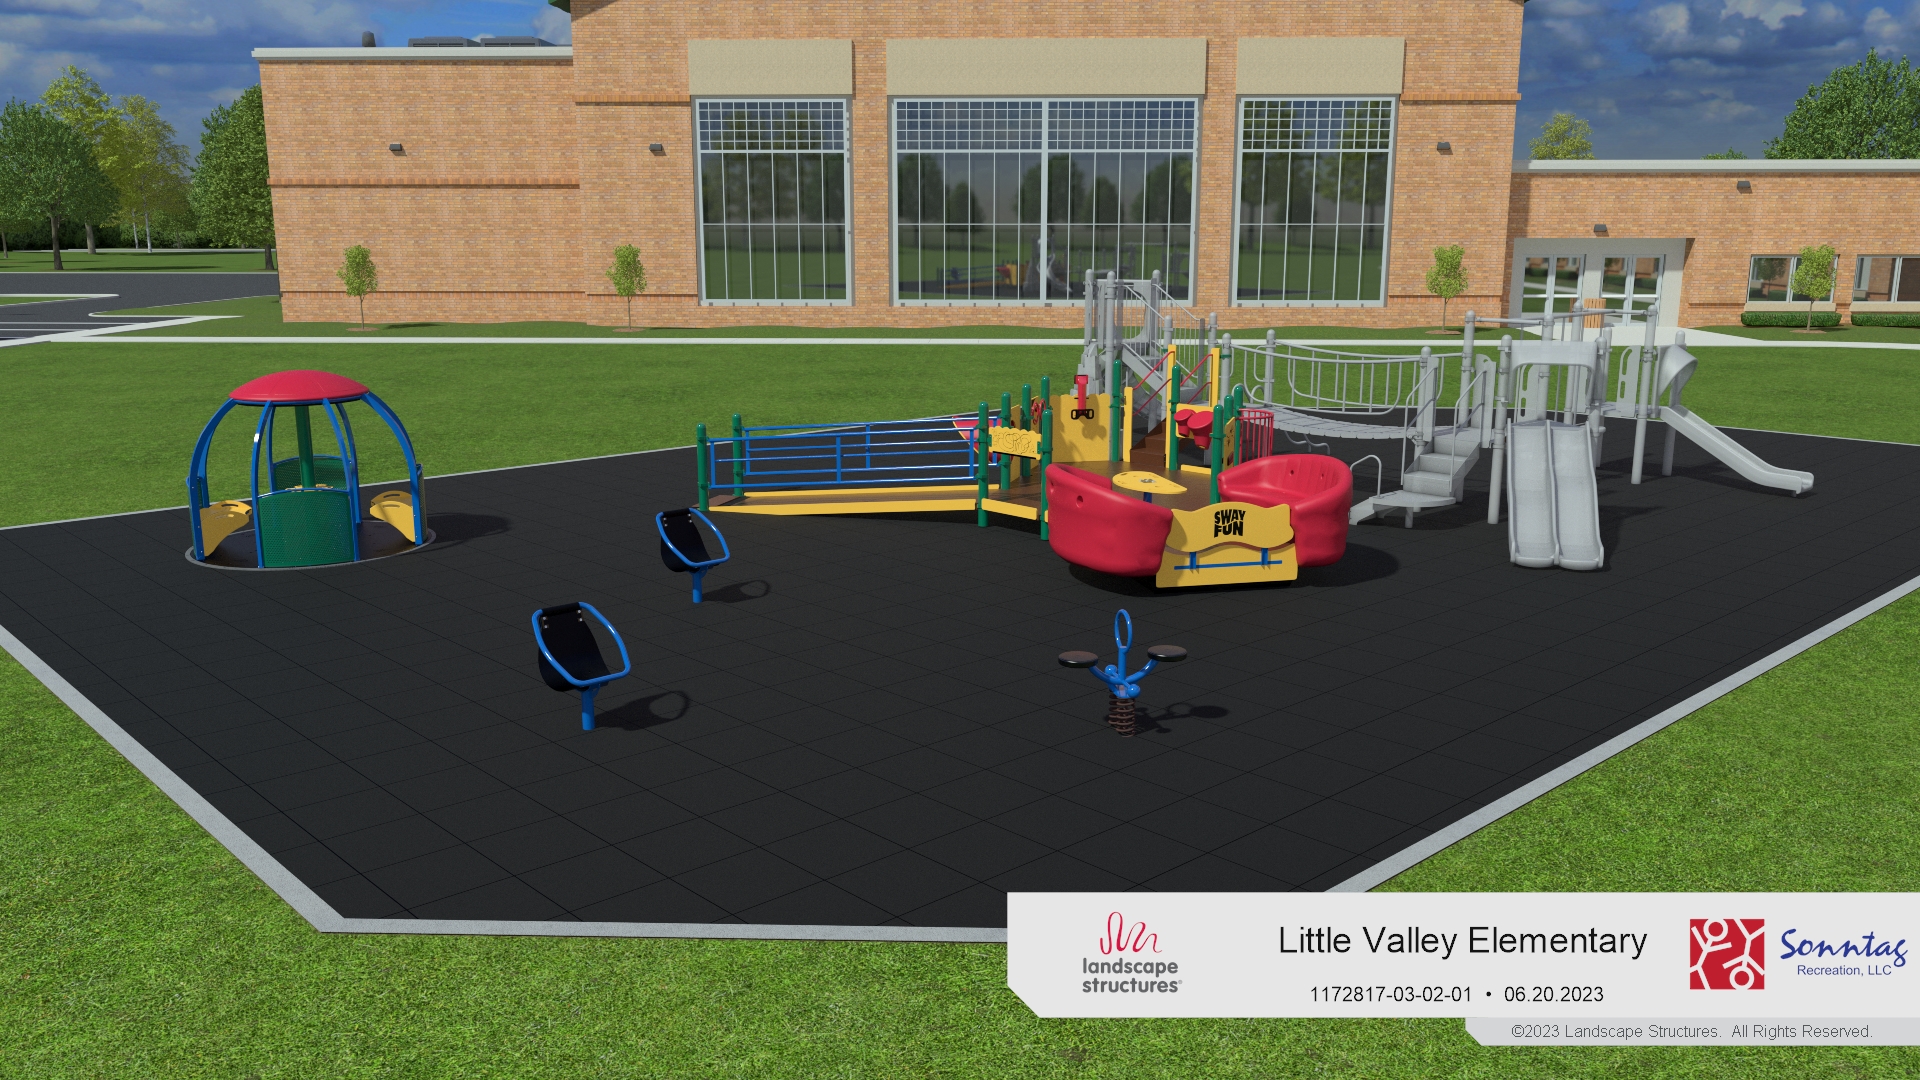 All abilities Playground #2